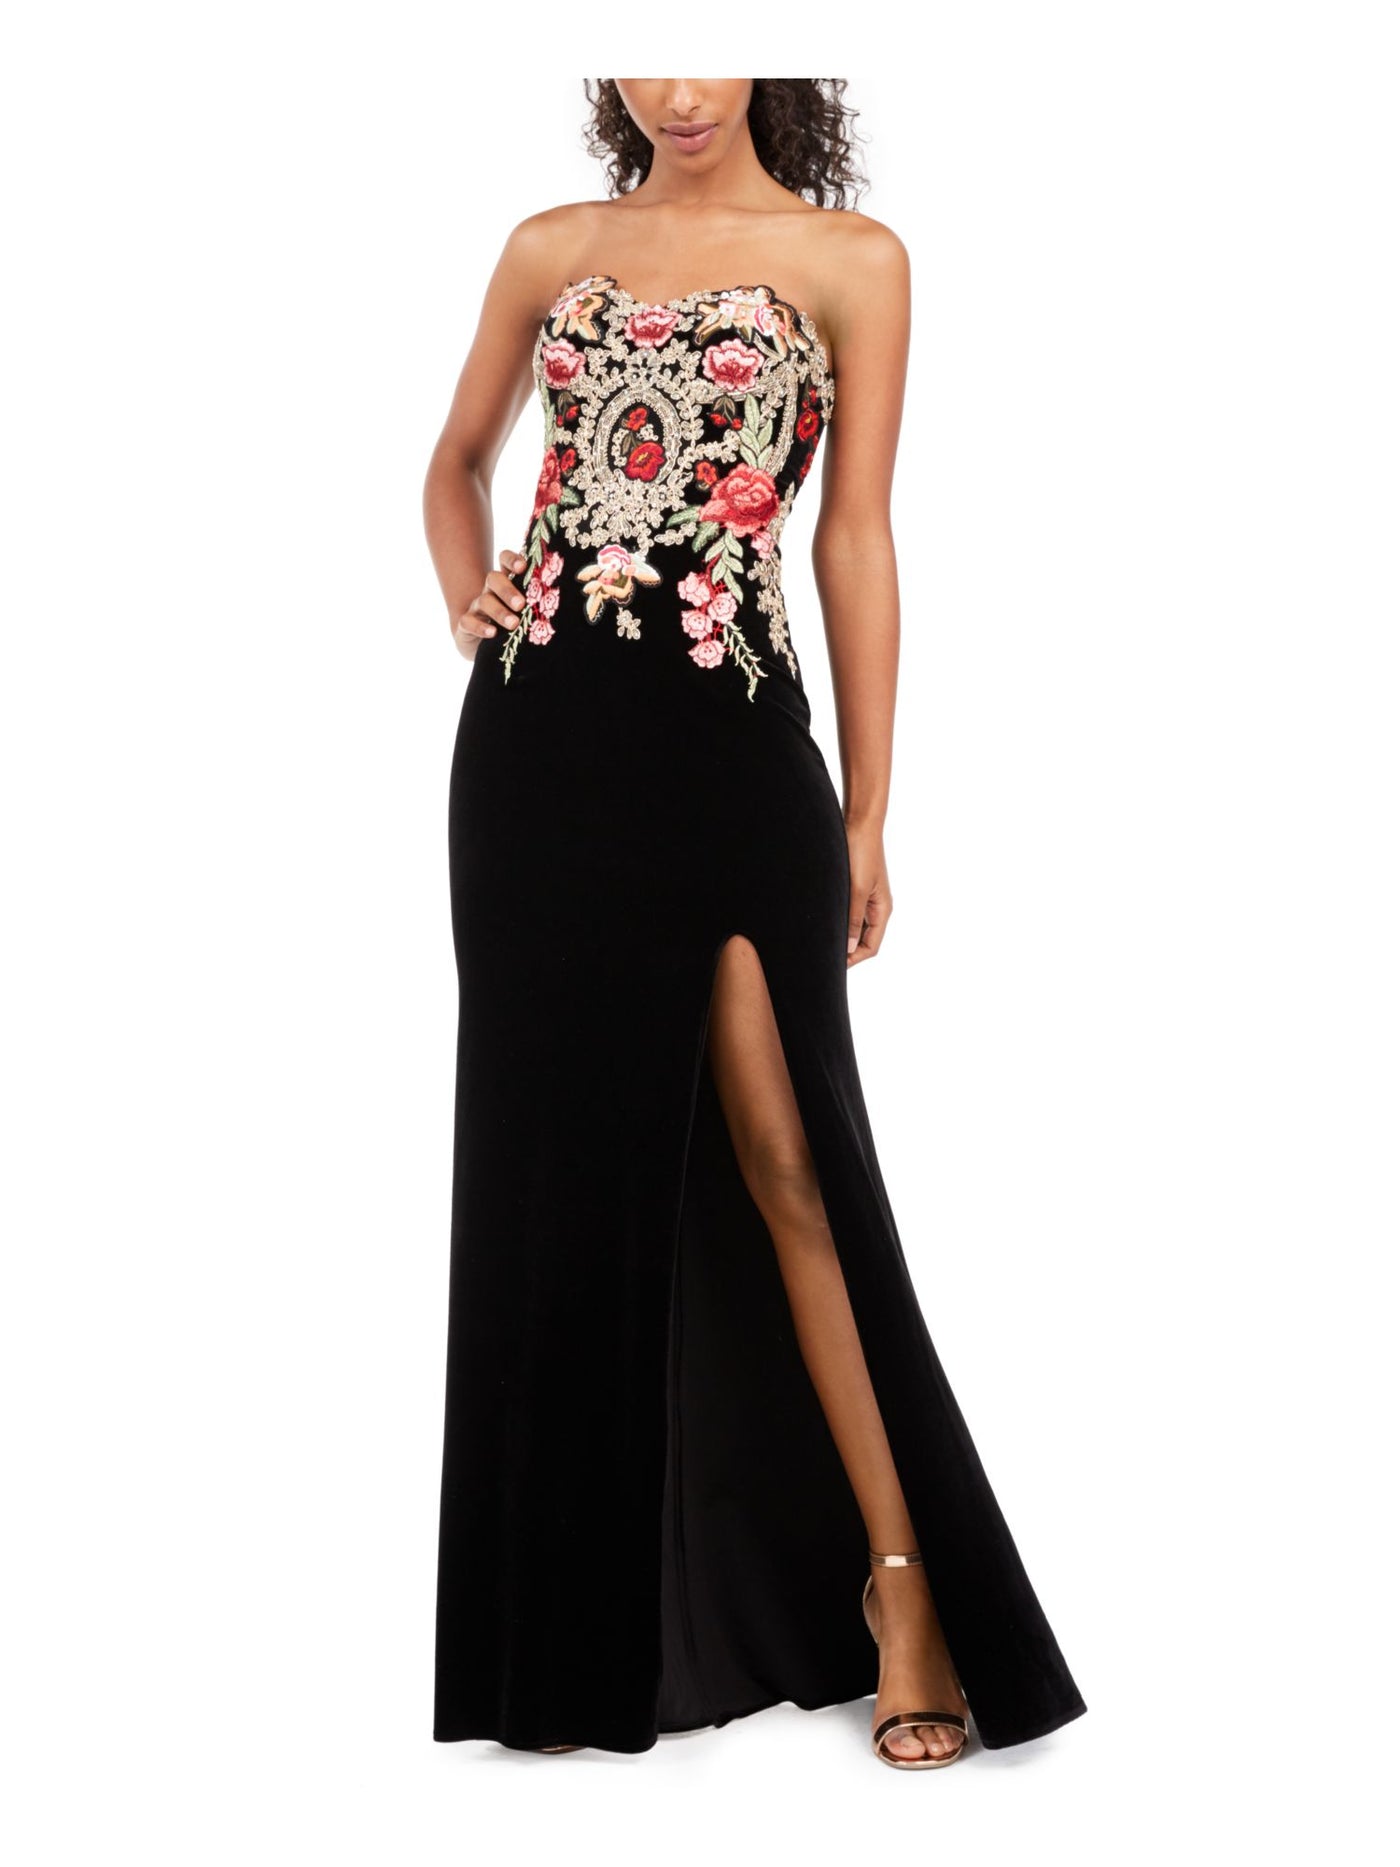 BLONDIE NITES Womens Embellished Flowers On The Top Sleeveless Strapless Full-Length Evening Fit + Flare Dress